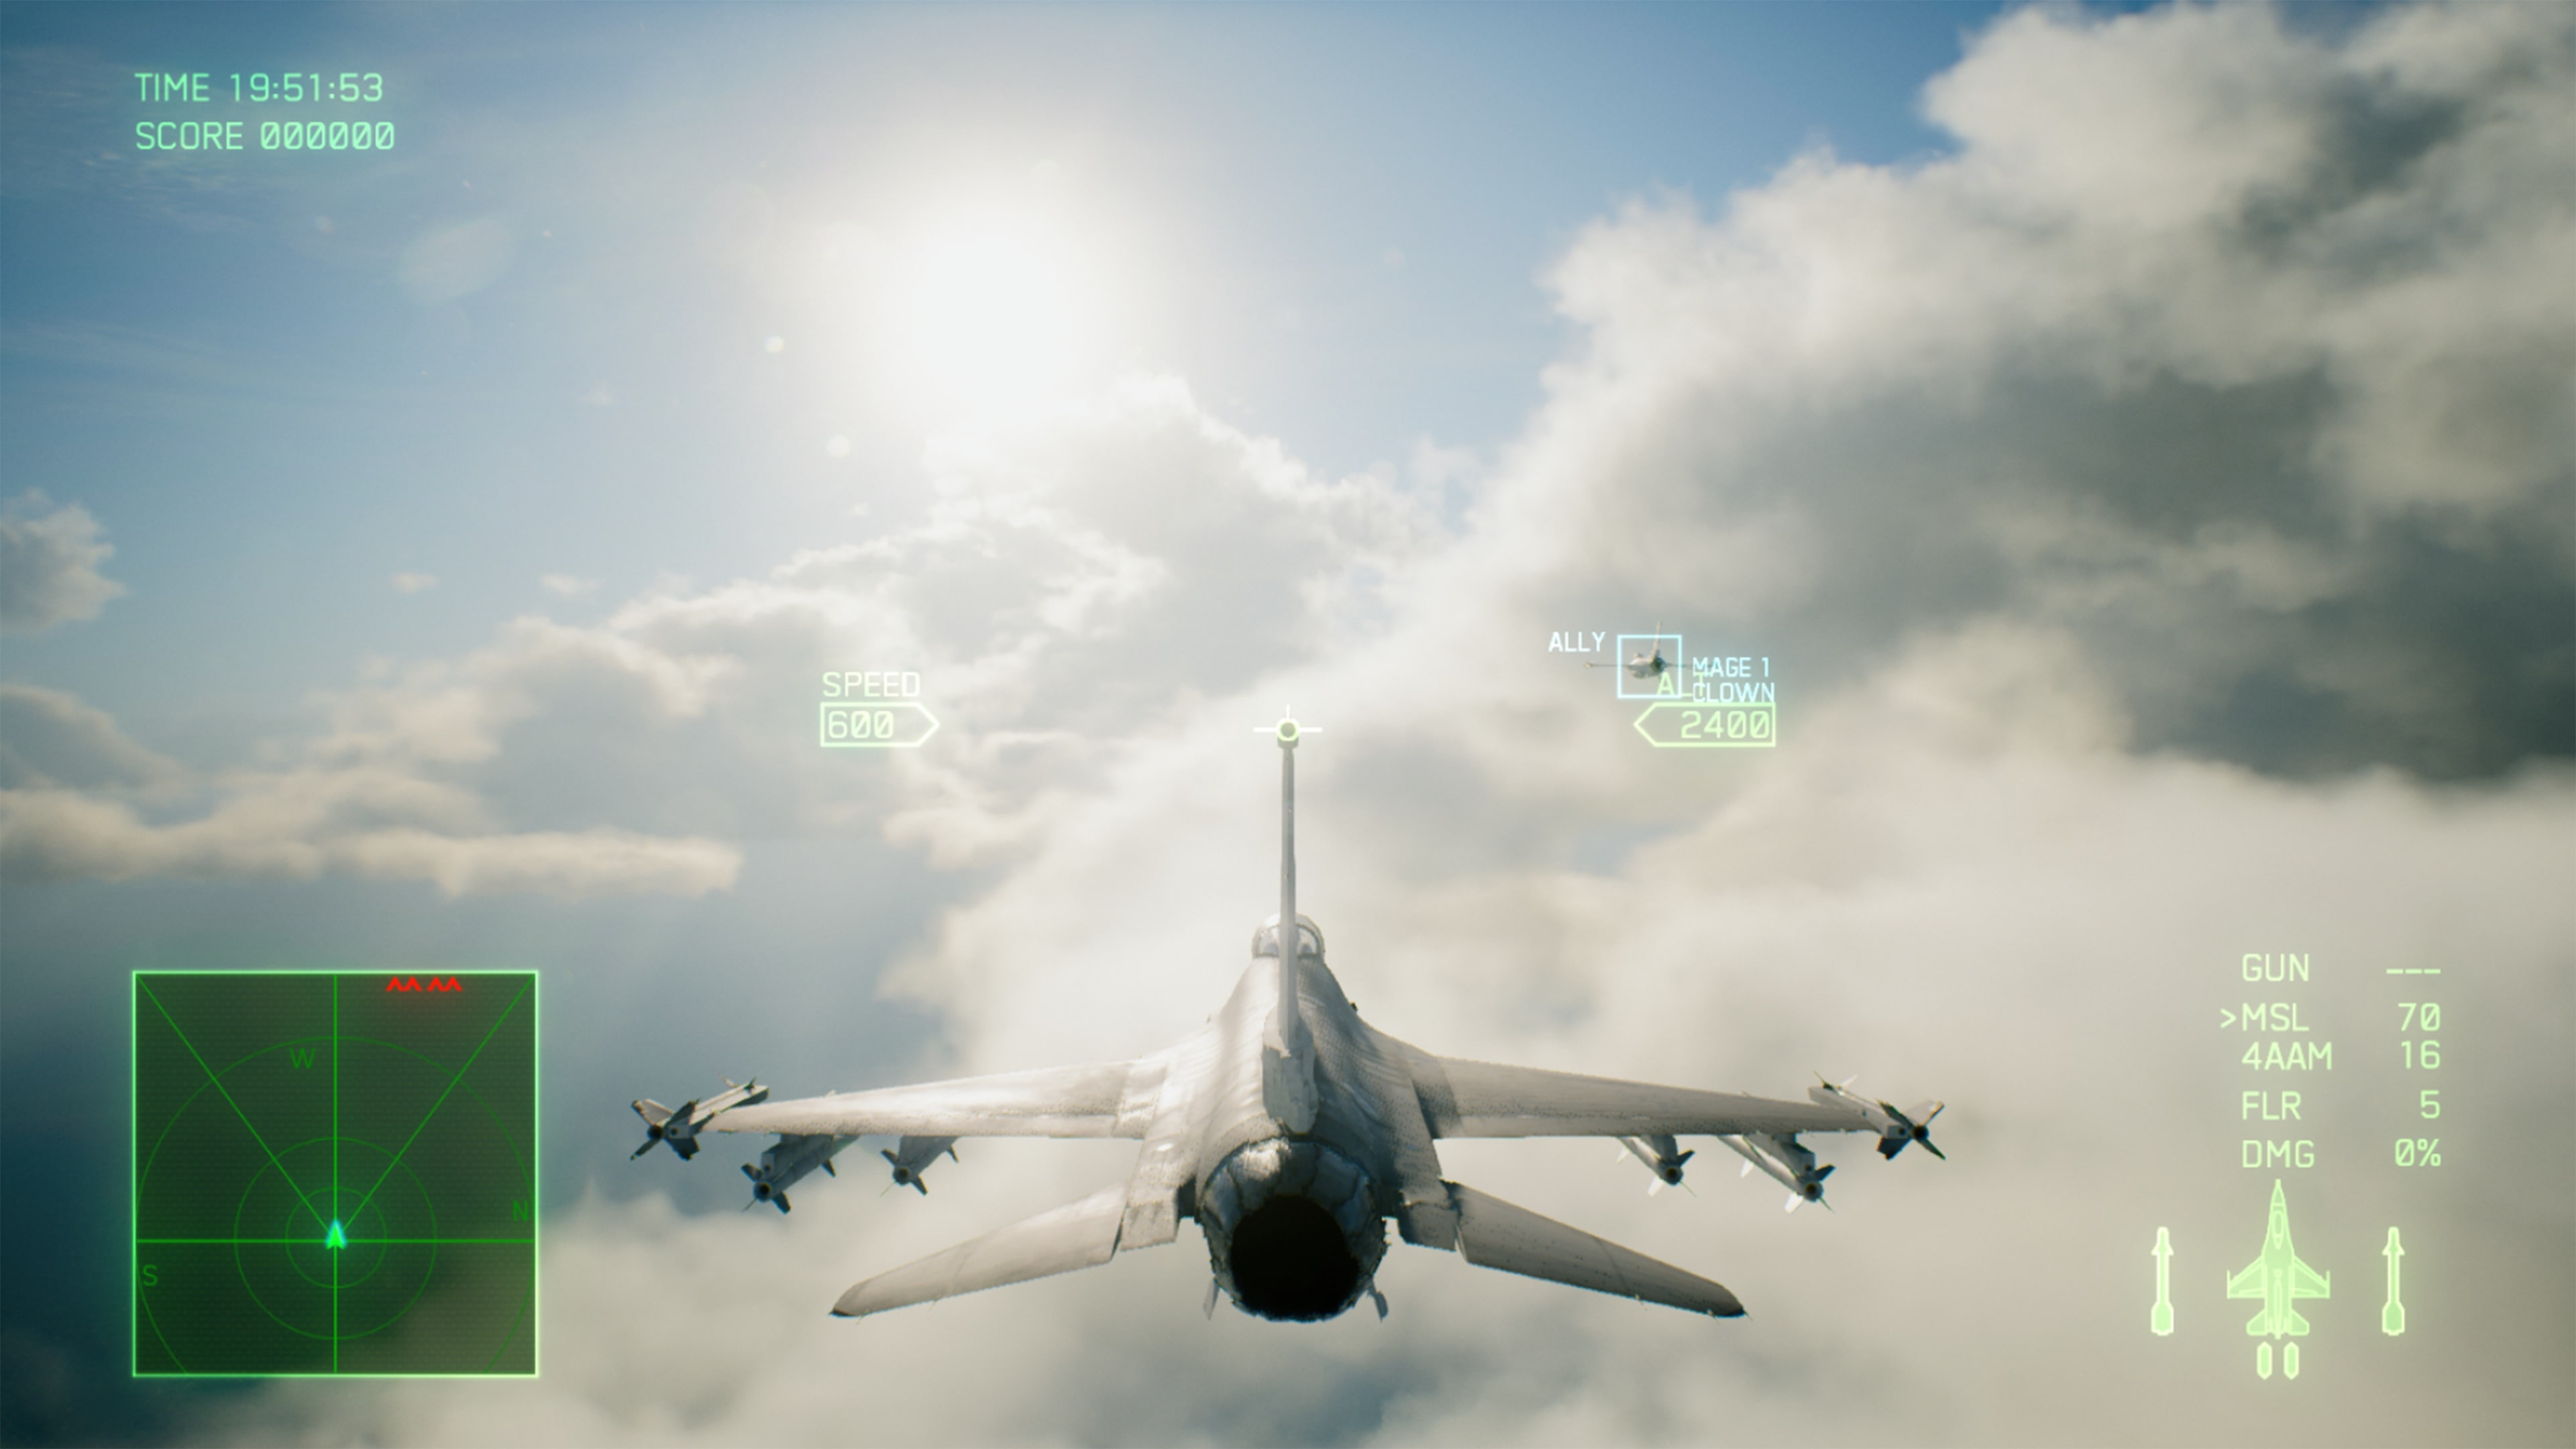 Ace Combat 7: Skies Unknown - PlayStation 4